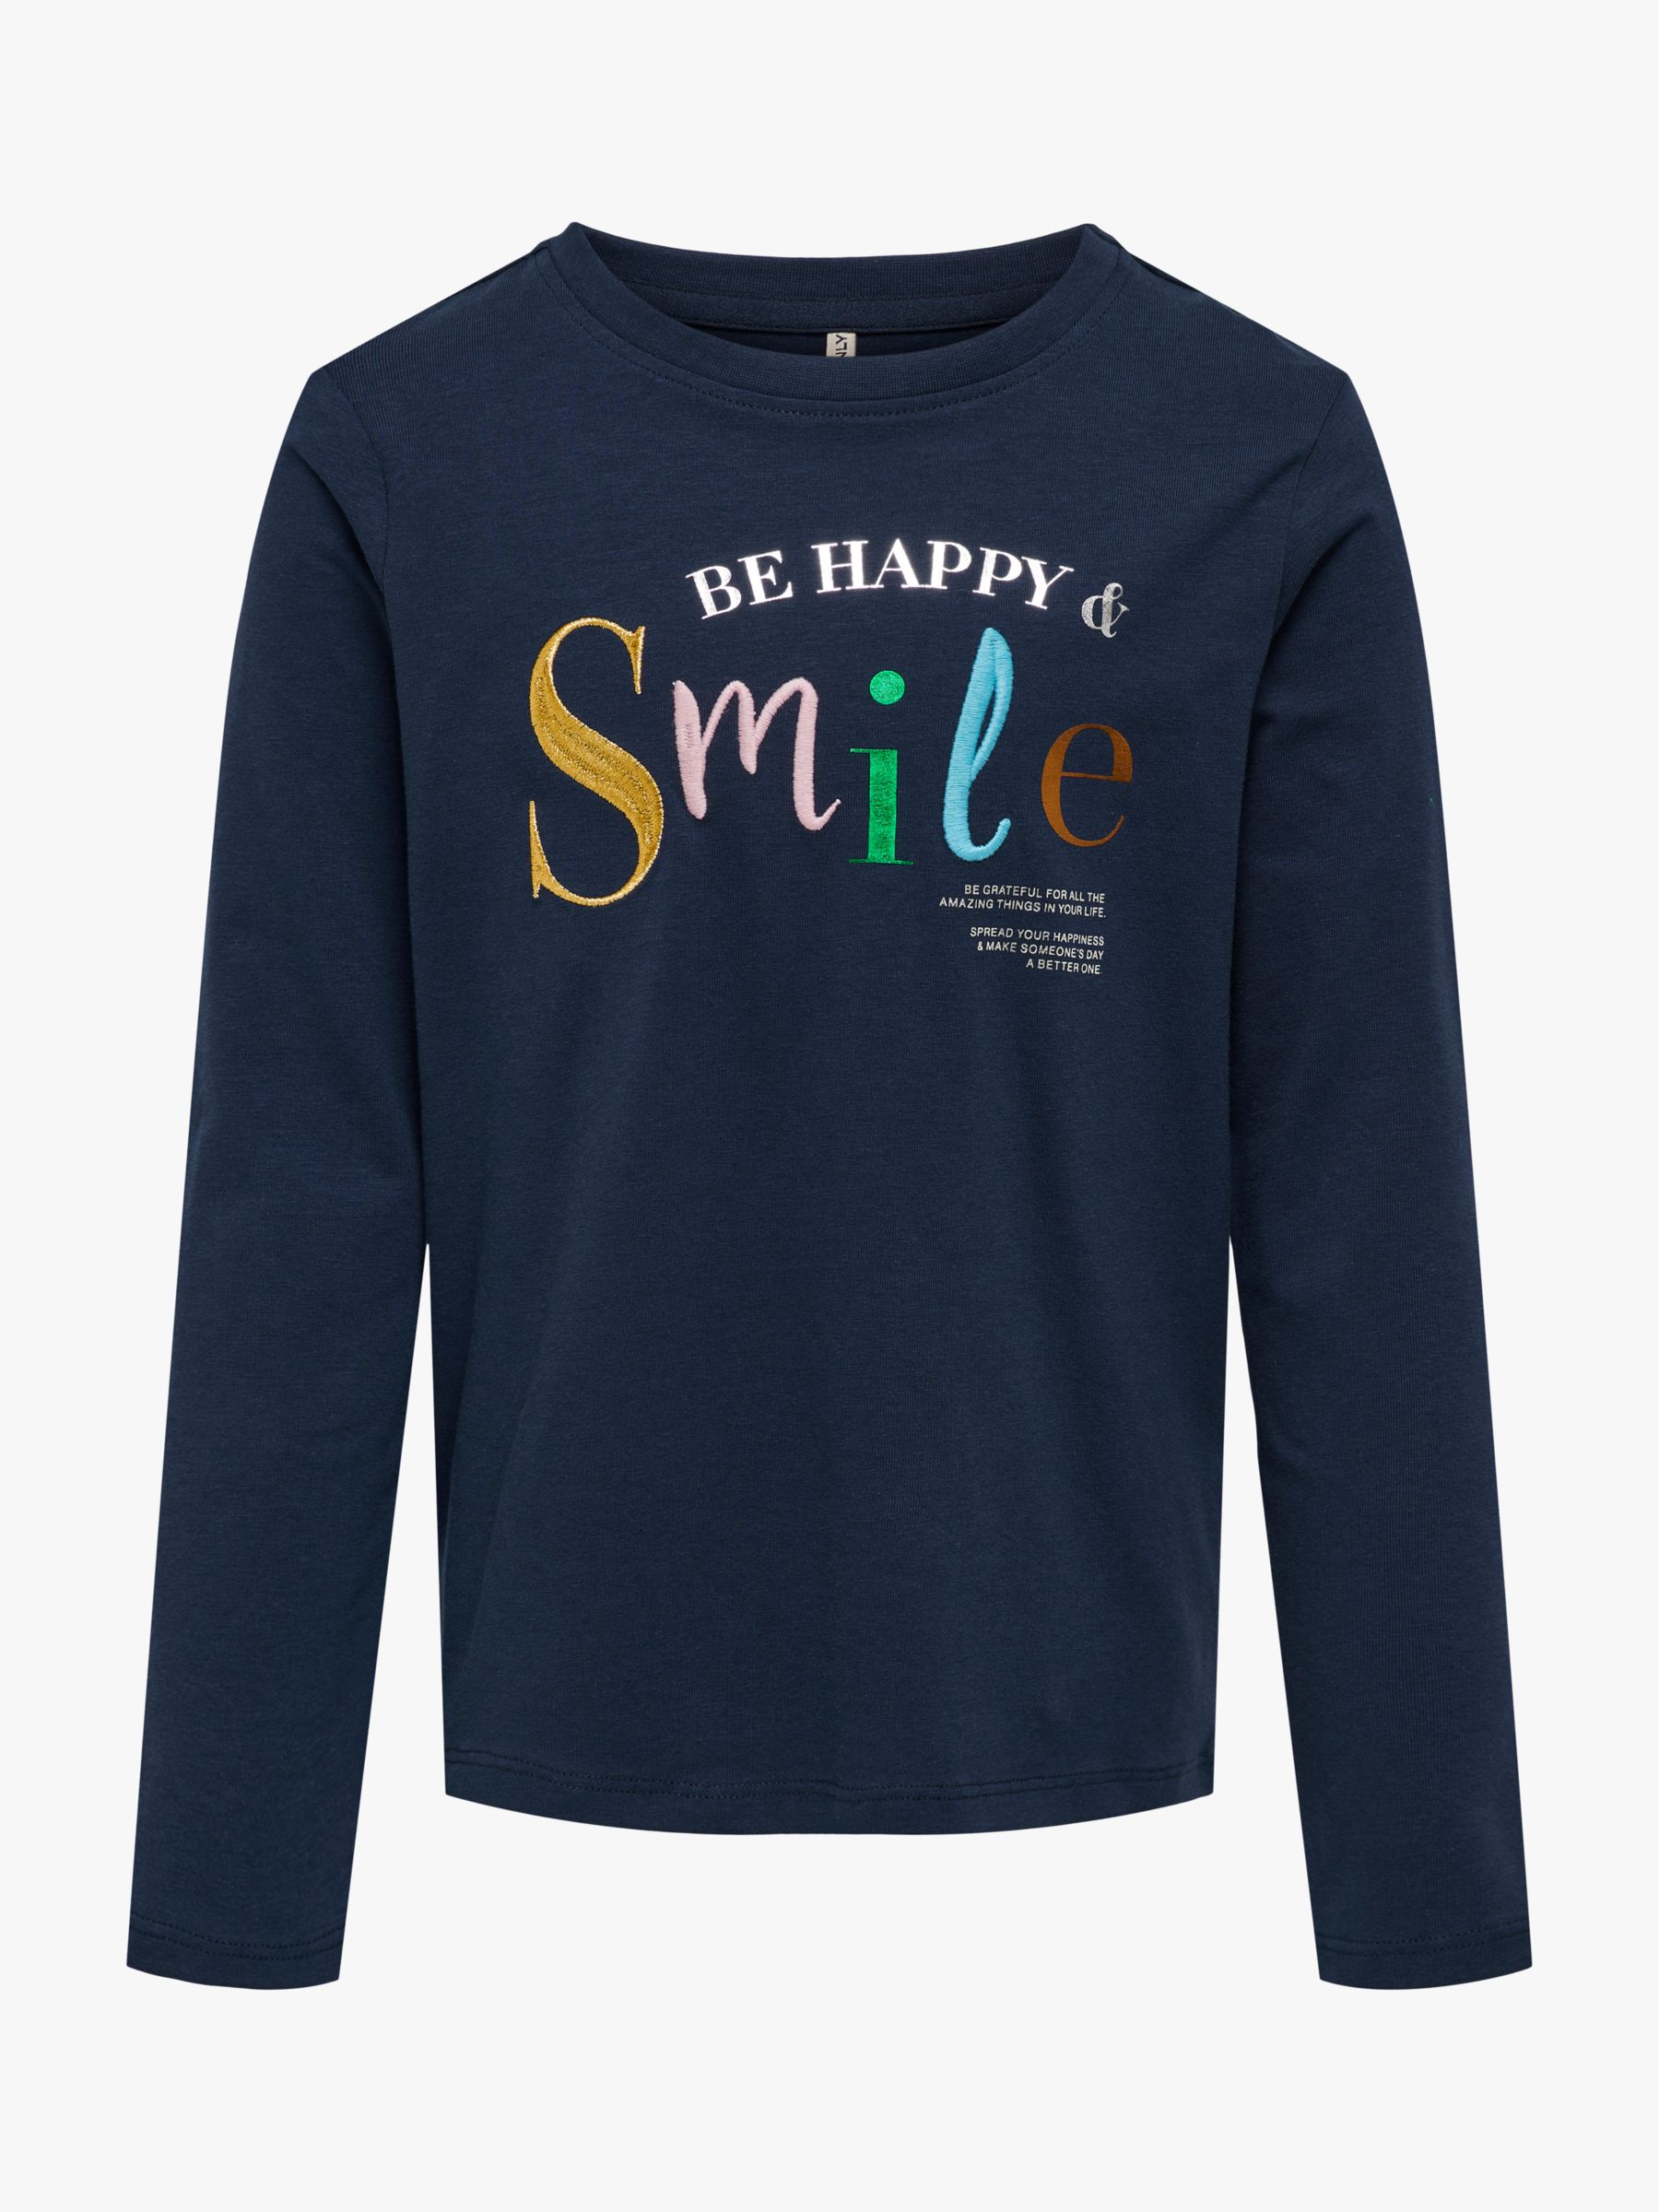 Happy Woman Smiling, Wearing A Grey Long Sleeve T-shirt And